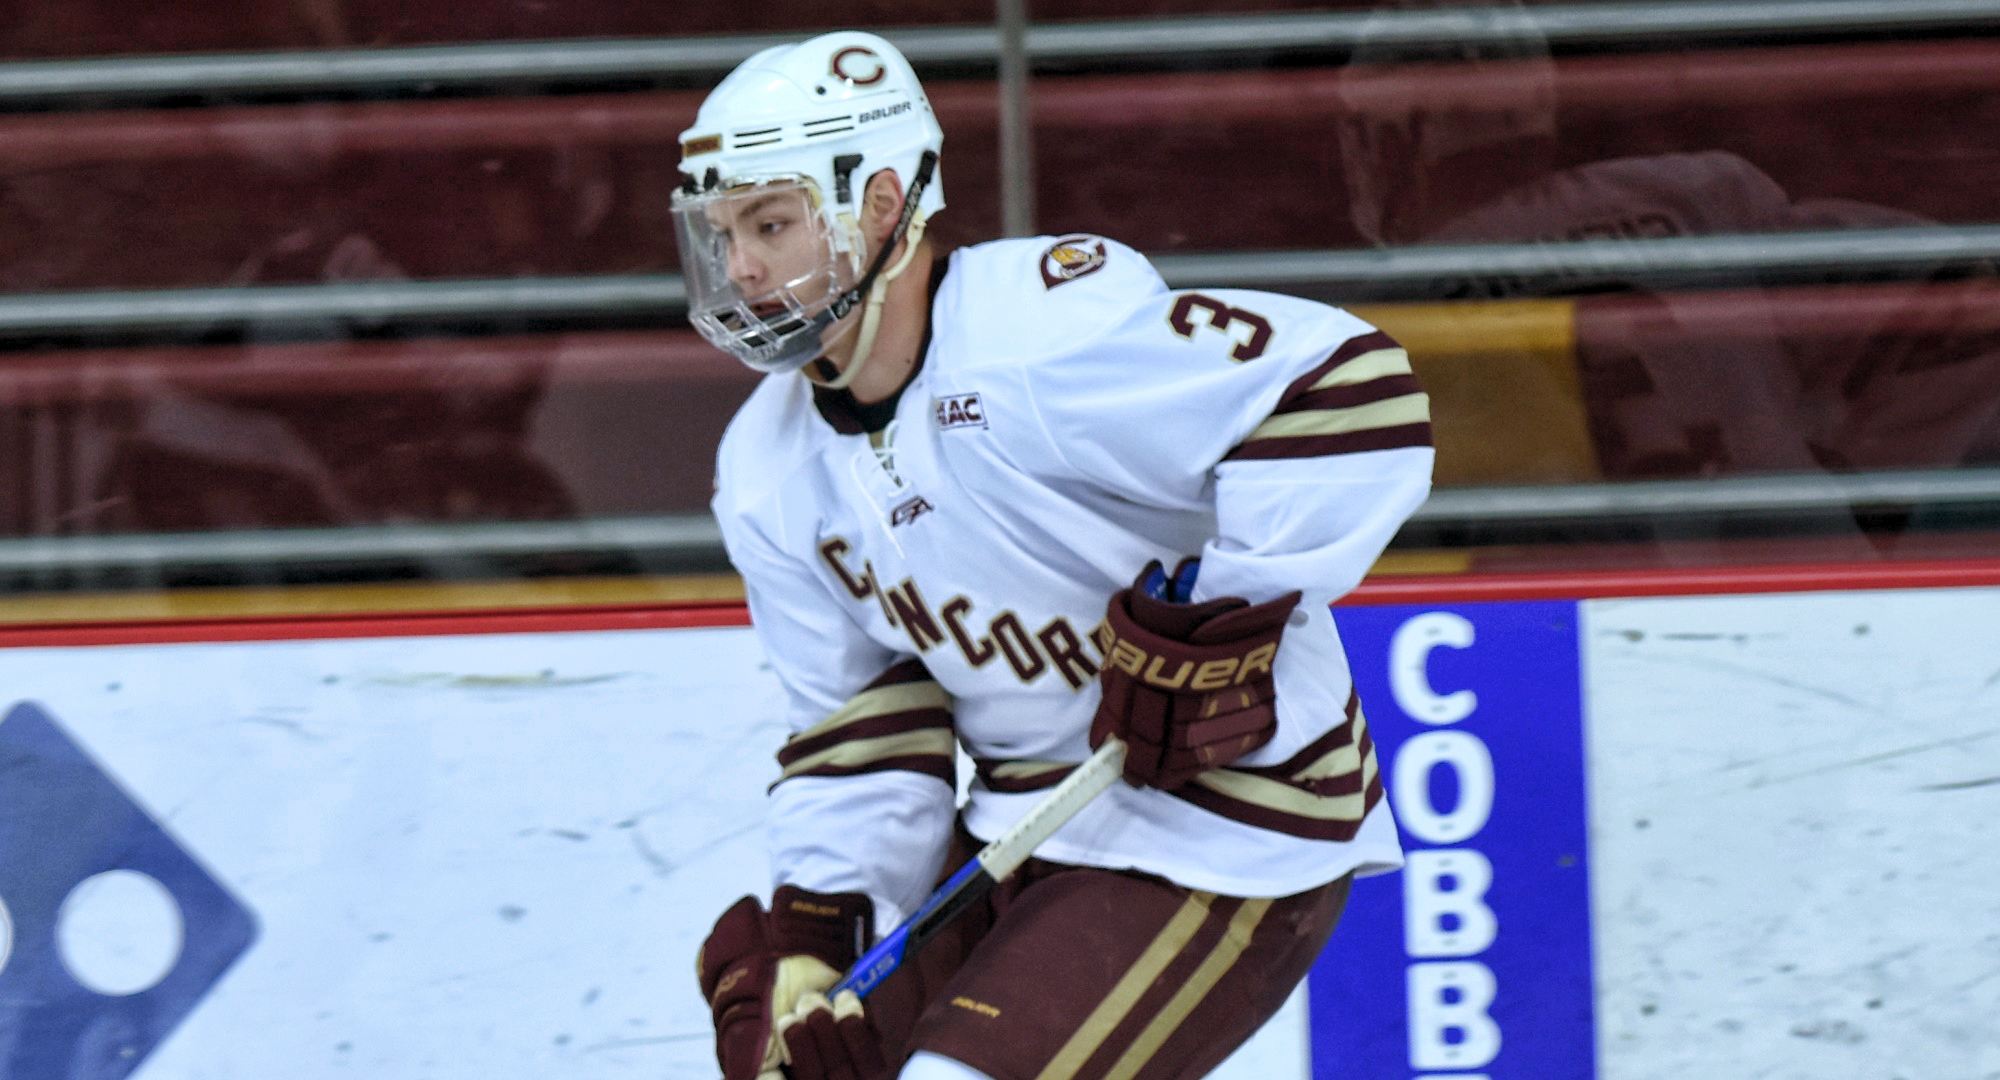 Kyle Siemers scored the only goal of the game in the Cobbers' 1-1 OT tie at Wis.-River Falls in the series finale.